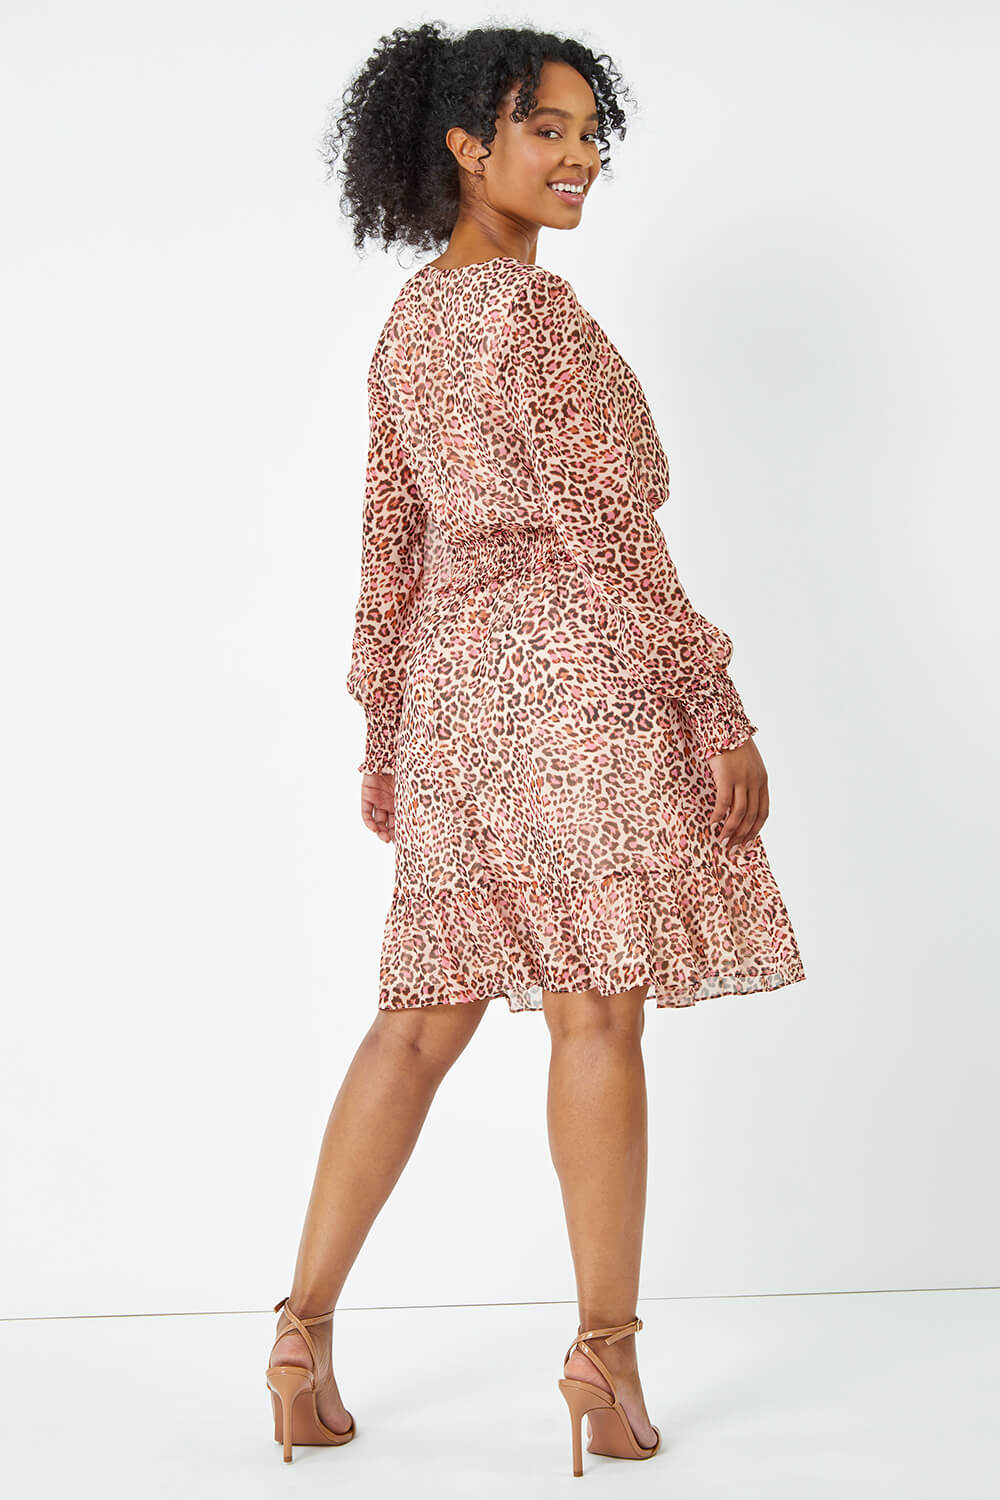 Stone Petite Tiered Leopard Print Frill Dress, Image 3 of 5